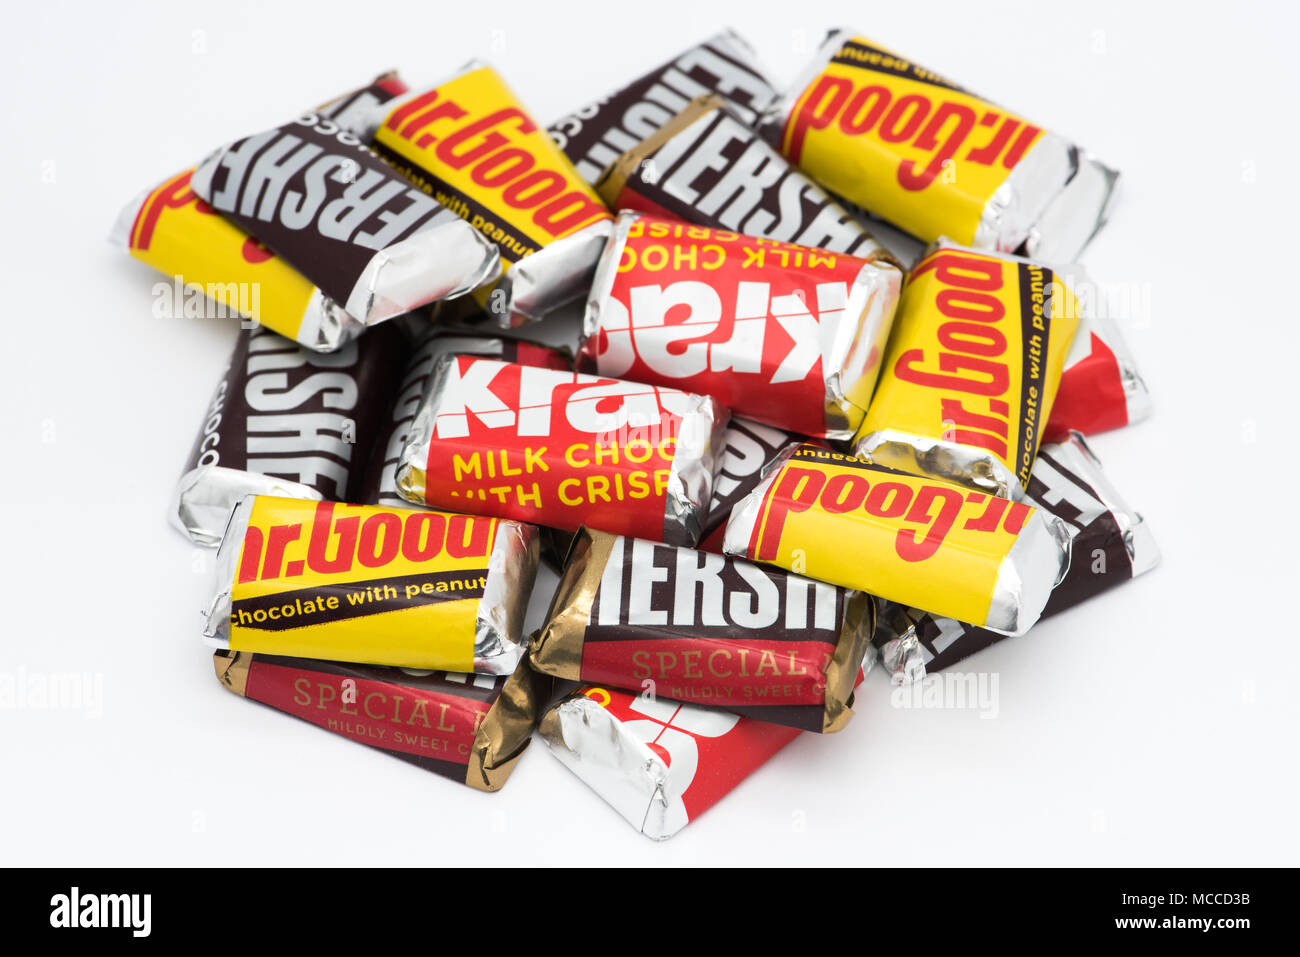 A pile of Hershey's miniature candy bars, in Milk Chocolate, Mr. Good bars, Krackel bars and Special Dark Chocolate flavors isolated. Stock Photo